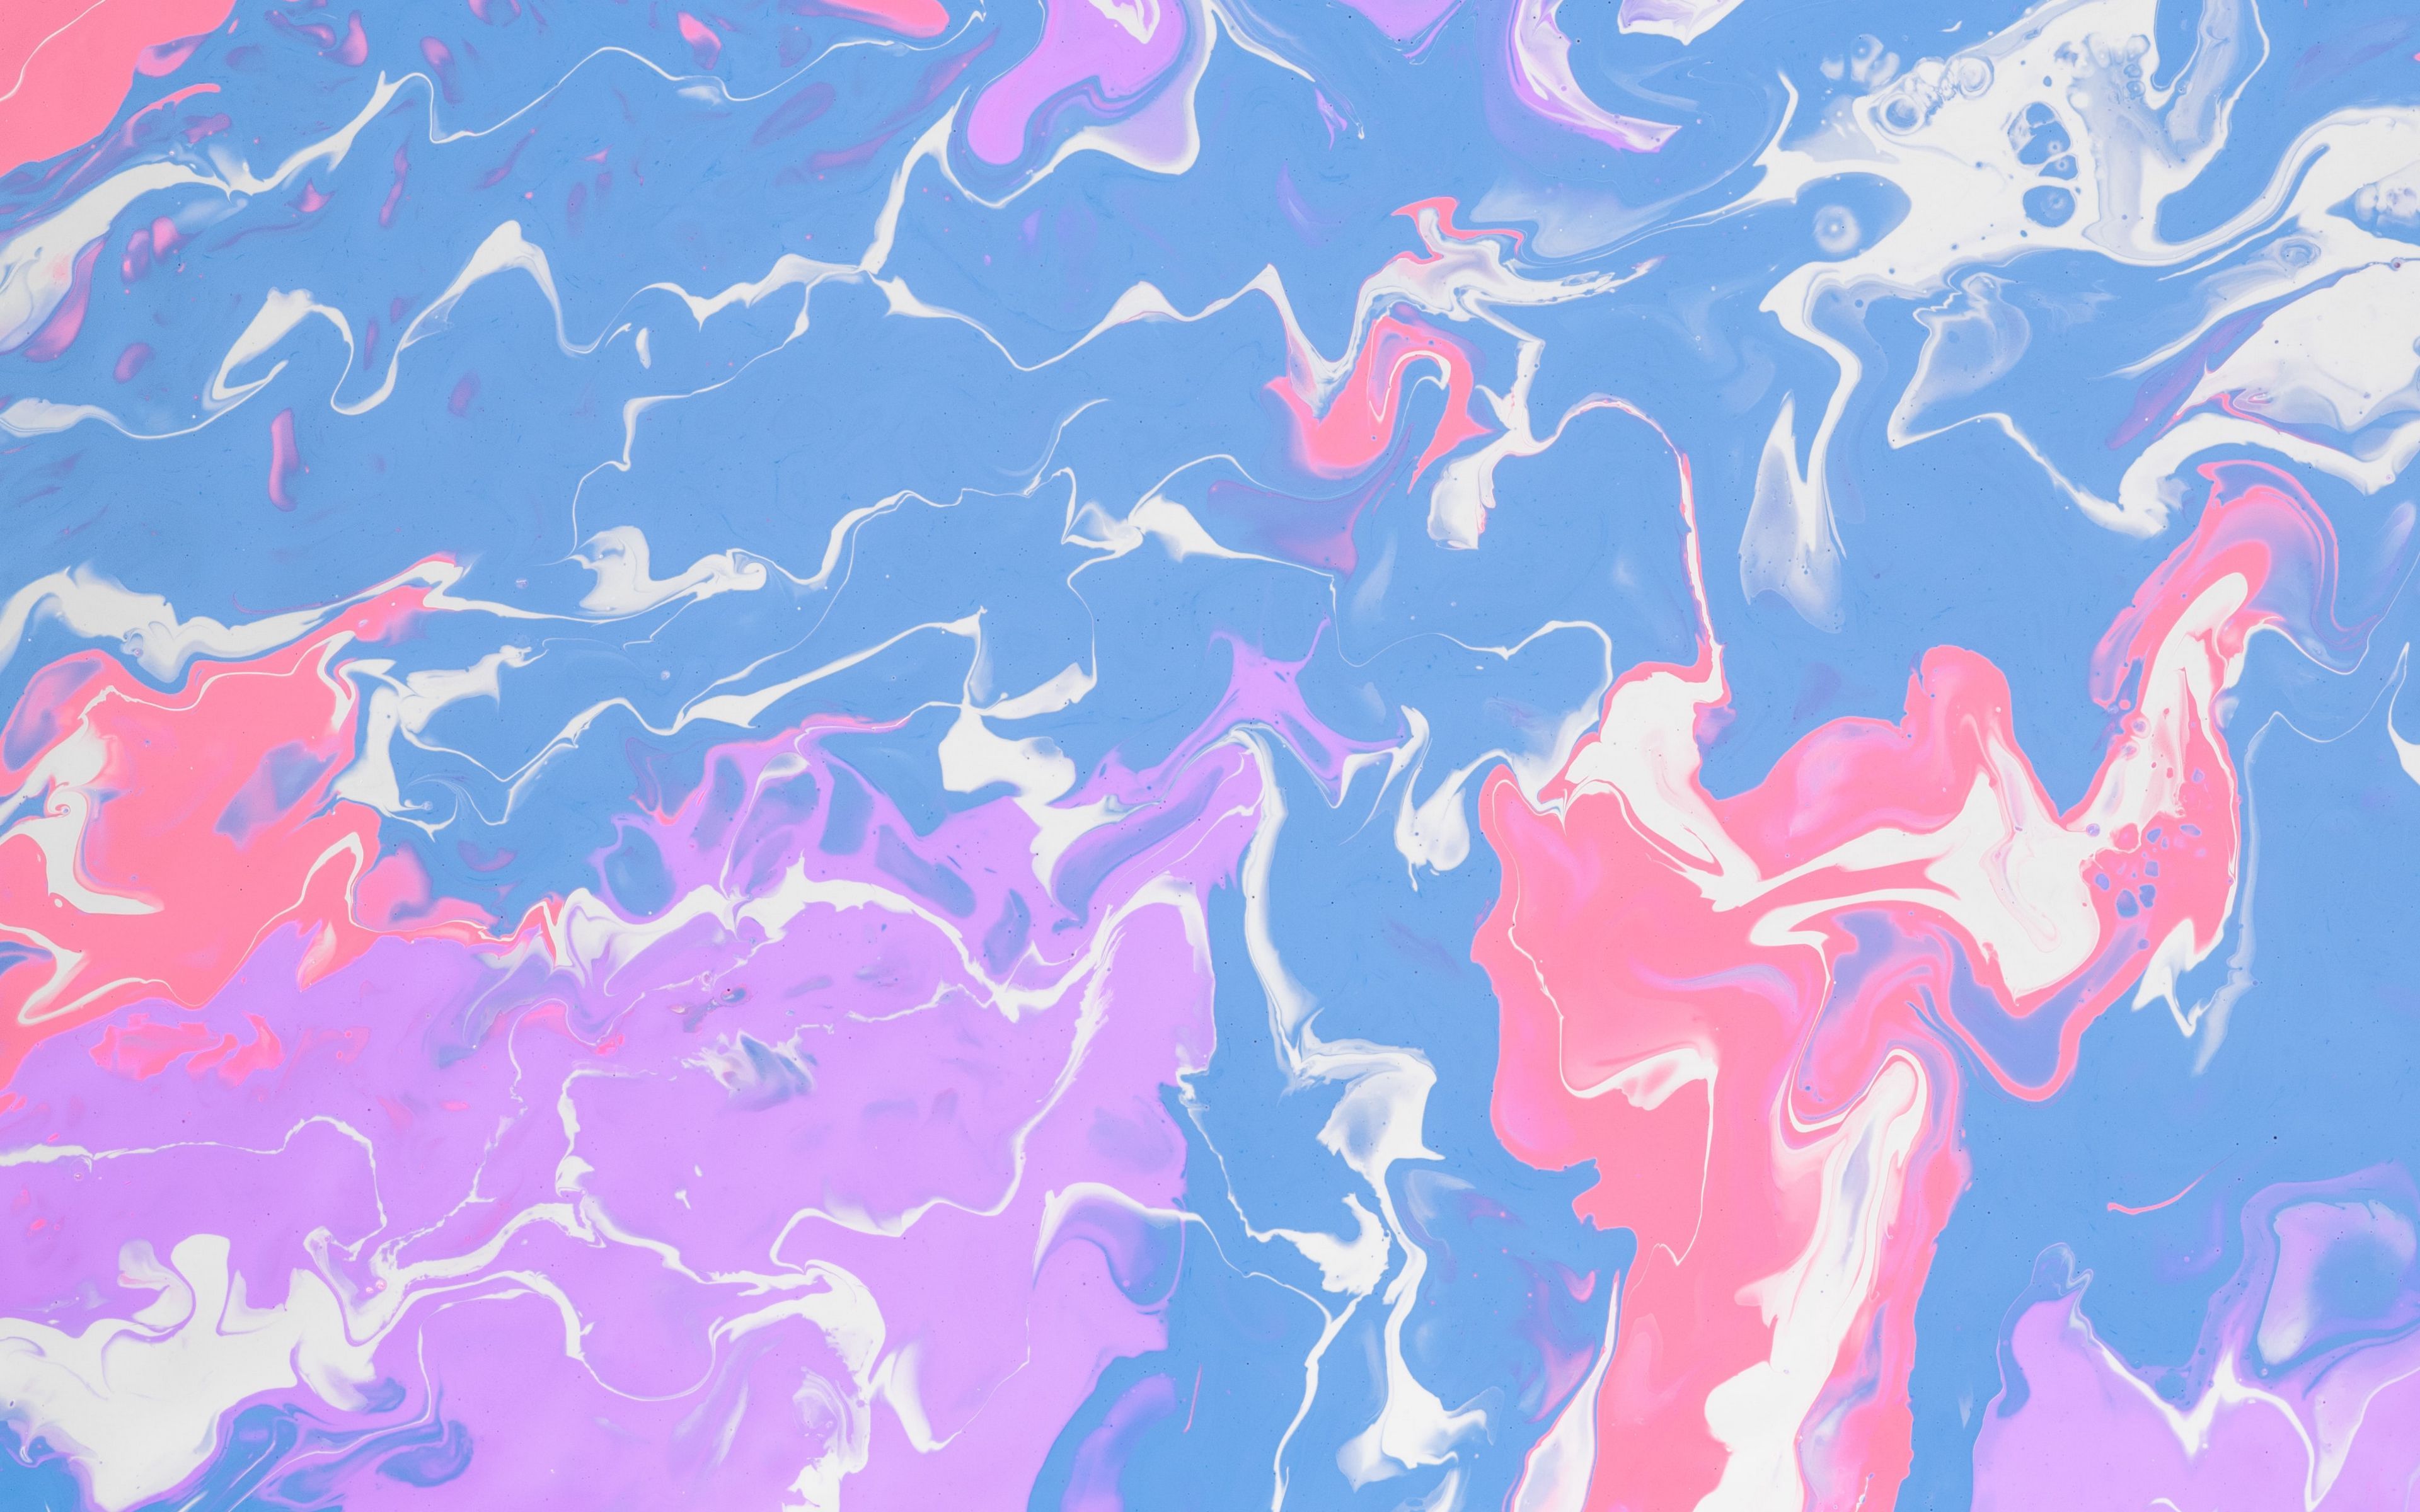 Download wallpaper 3840x2400 paint, stains, liquid, fluid art, colorful, pastel 4k ultra HD 16:10 HD background